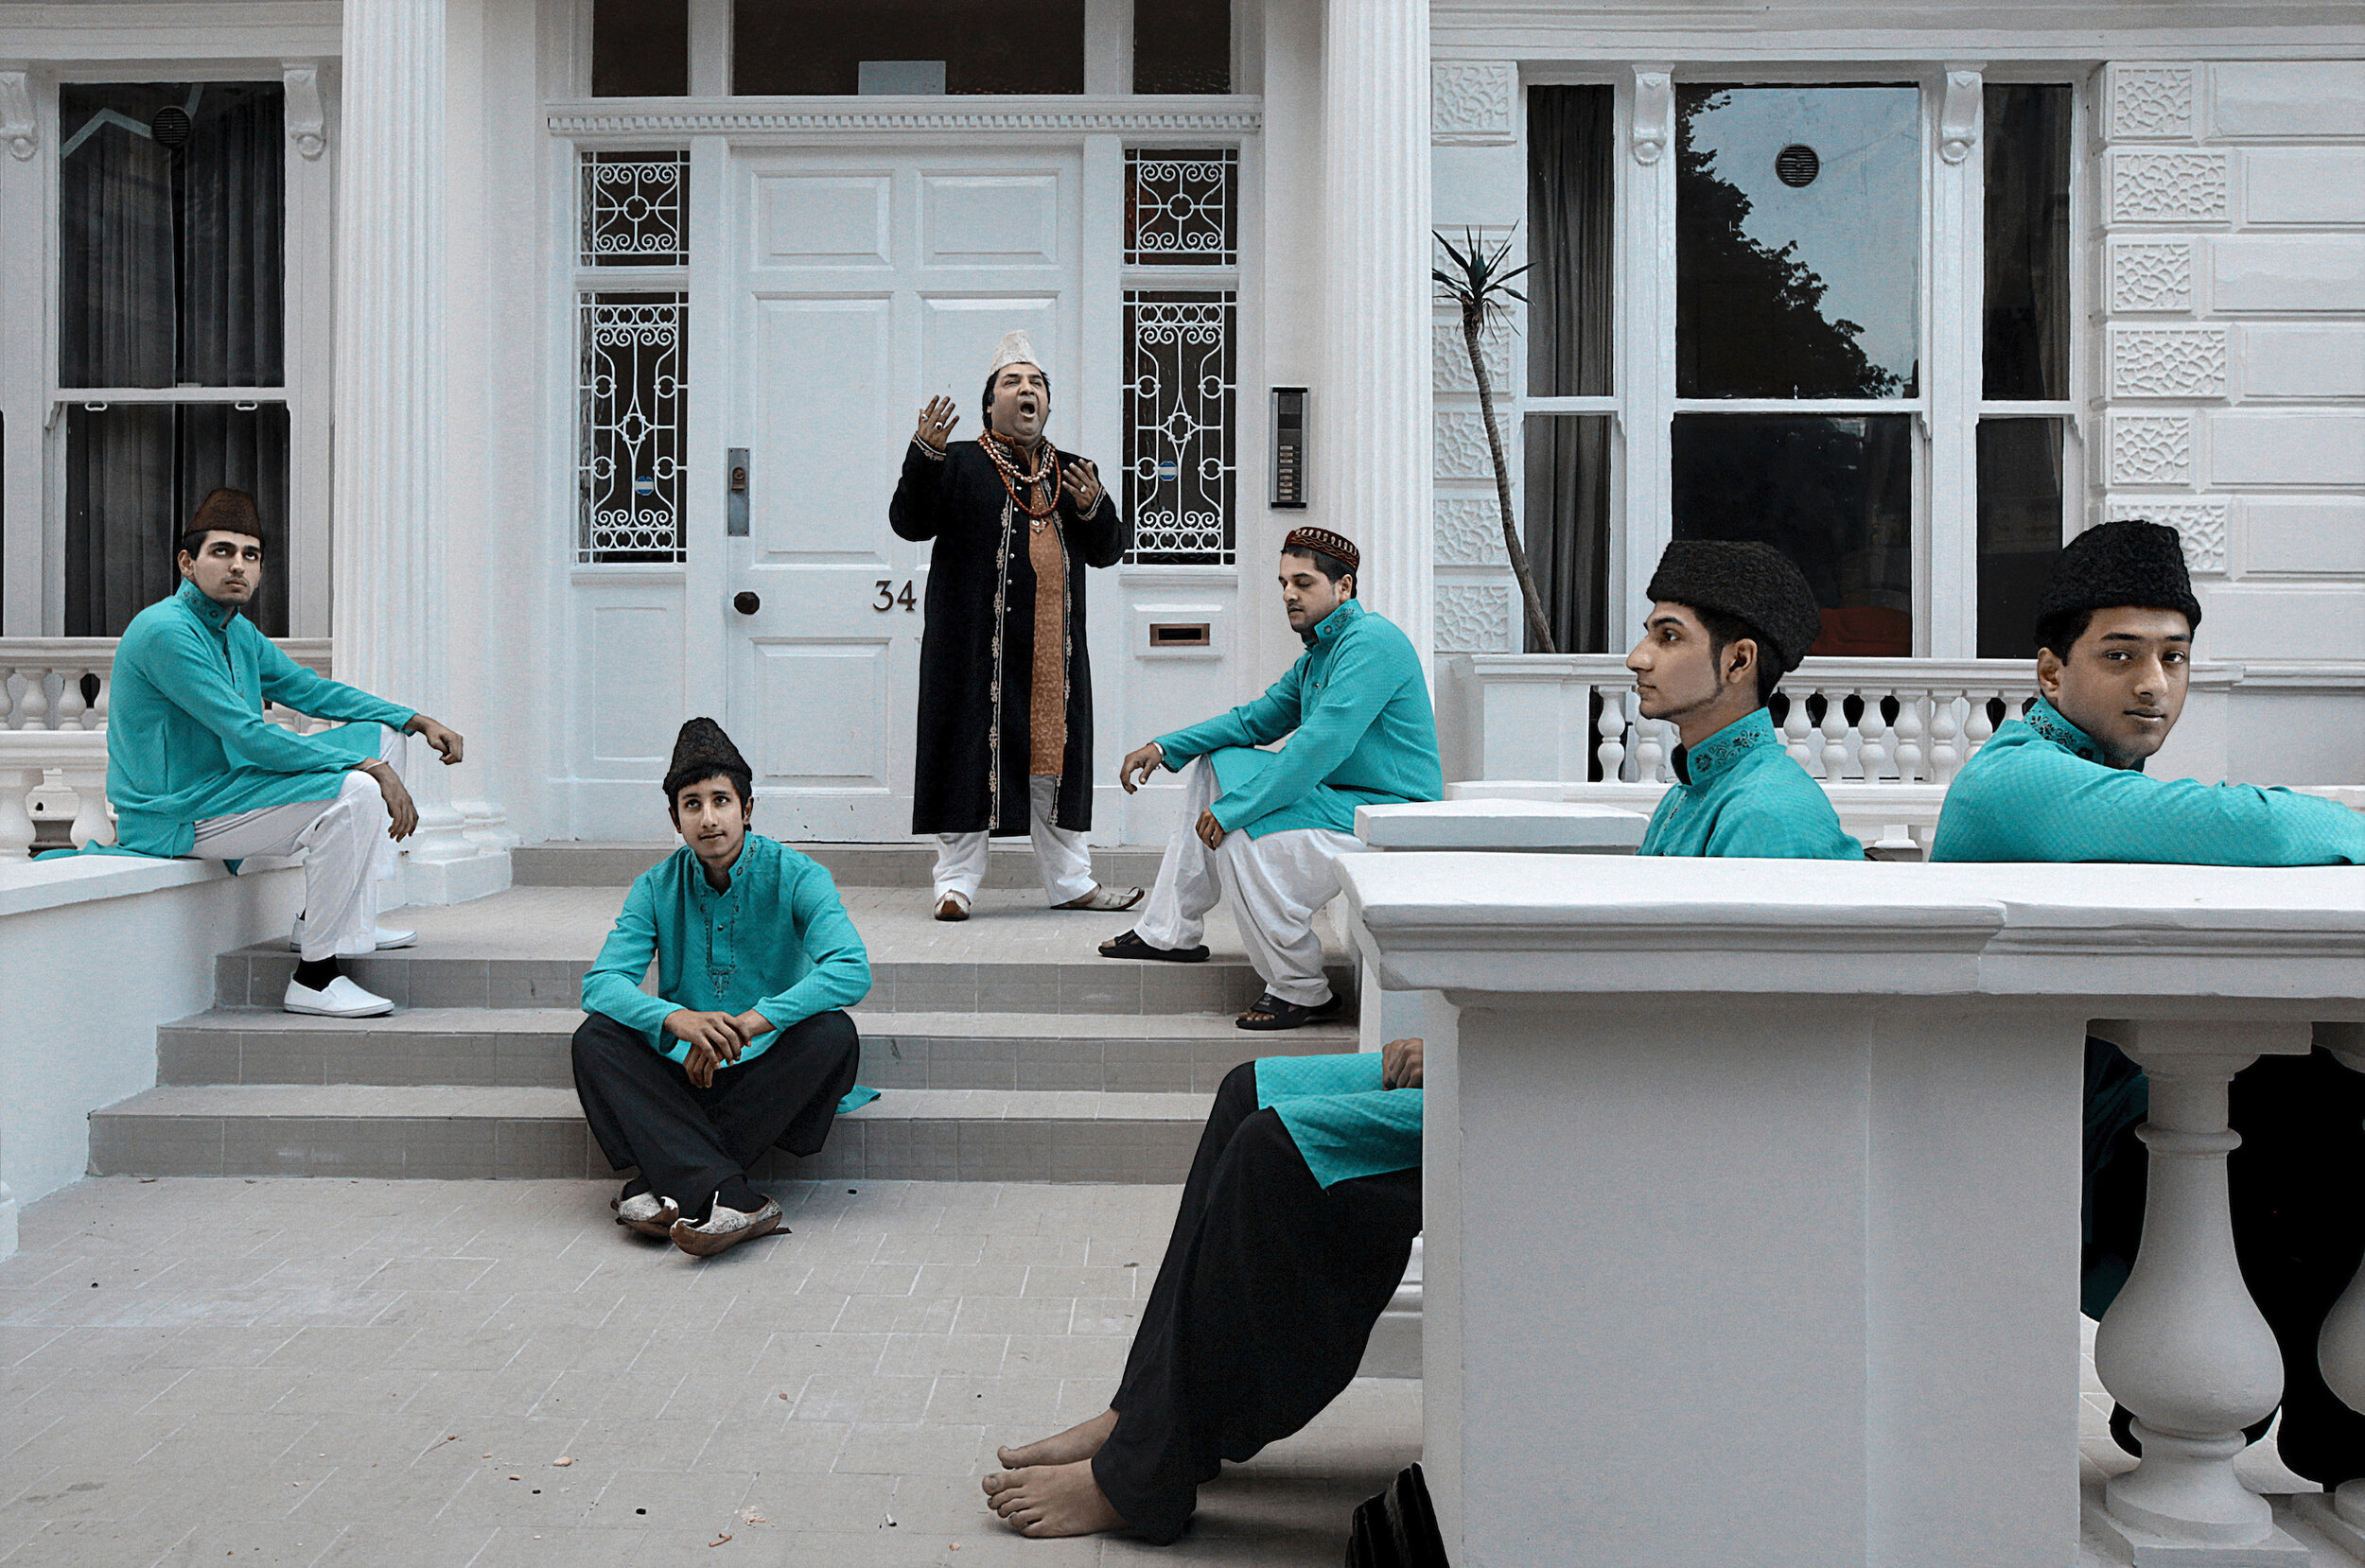   UK. London. 2011. Ustad Hajji Ameer Khan [standing] says a prayer before he and his team leaves for a musical performance. Khan is a Qawwal, a Sufi devotional musician.        